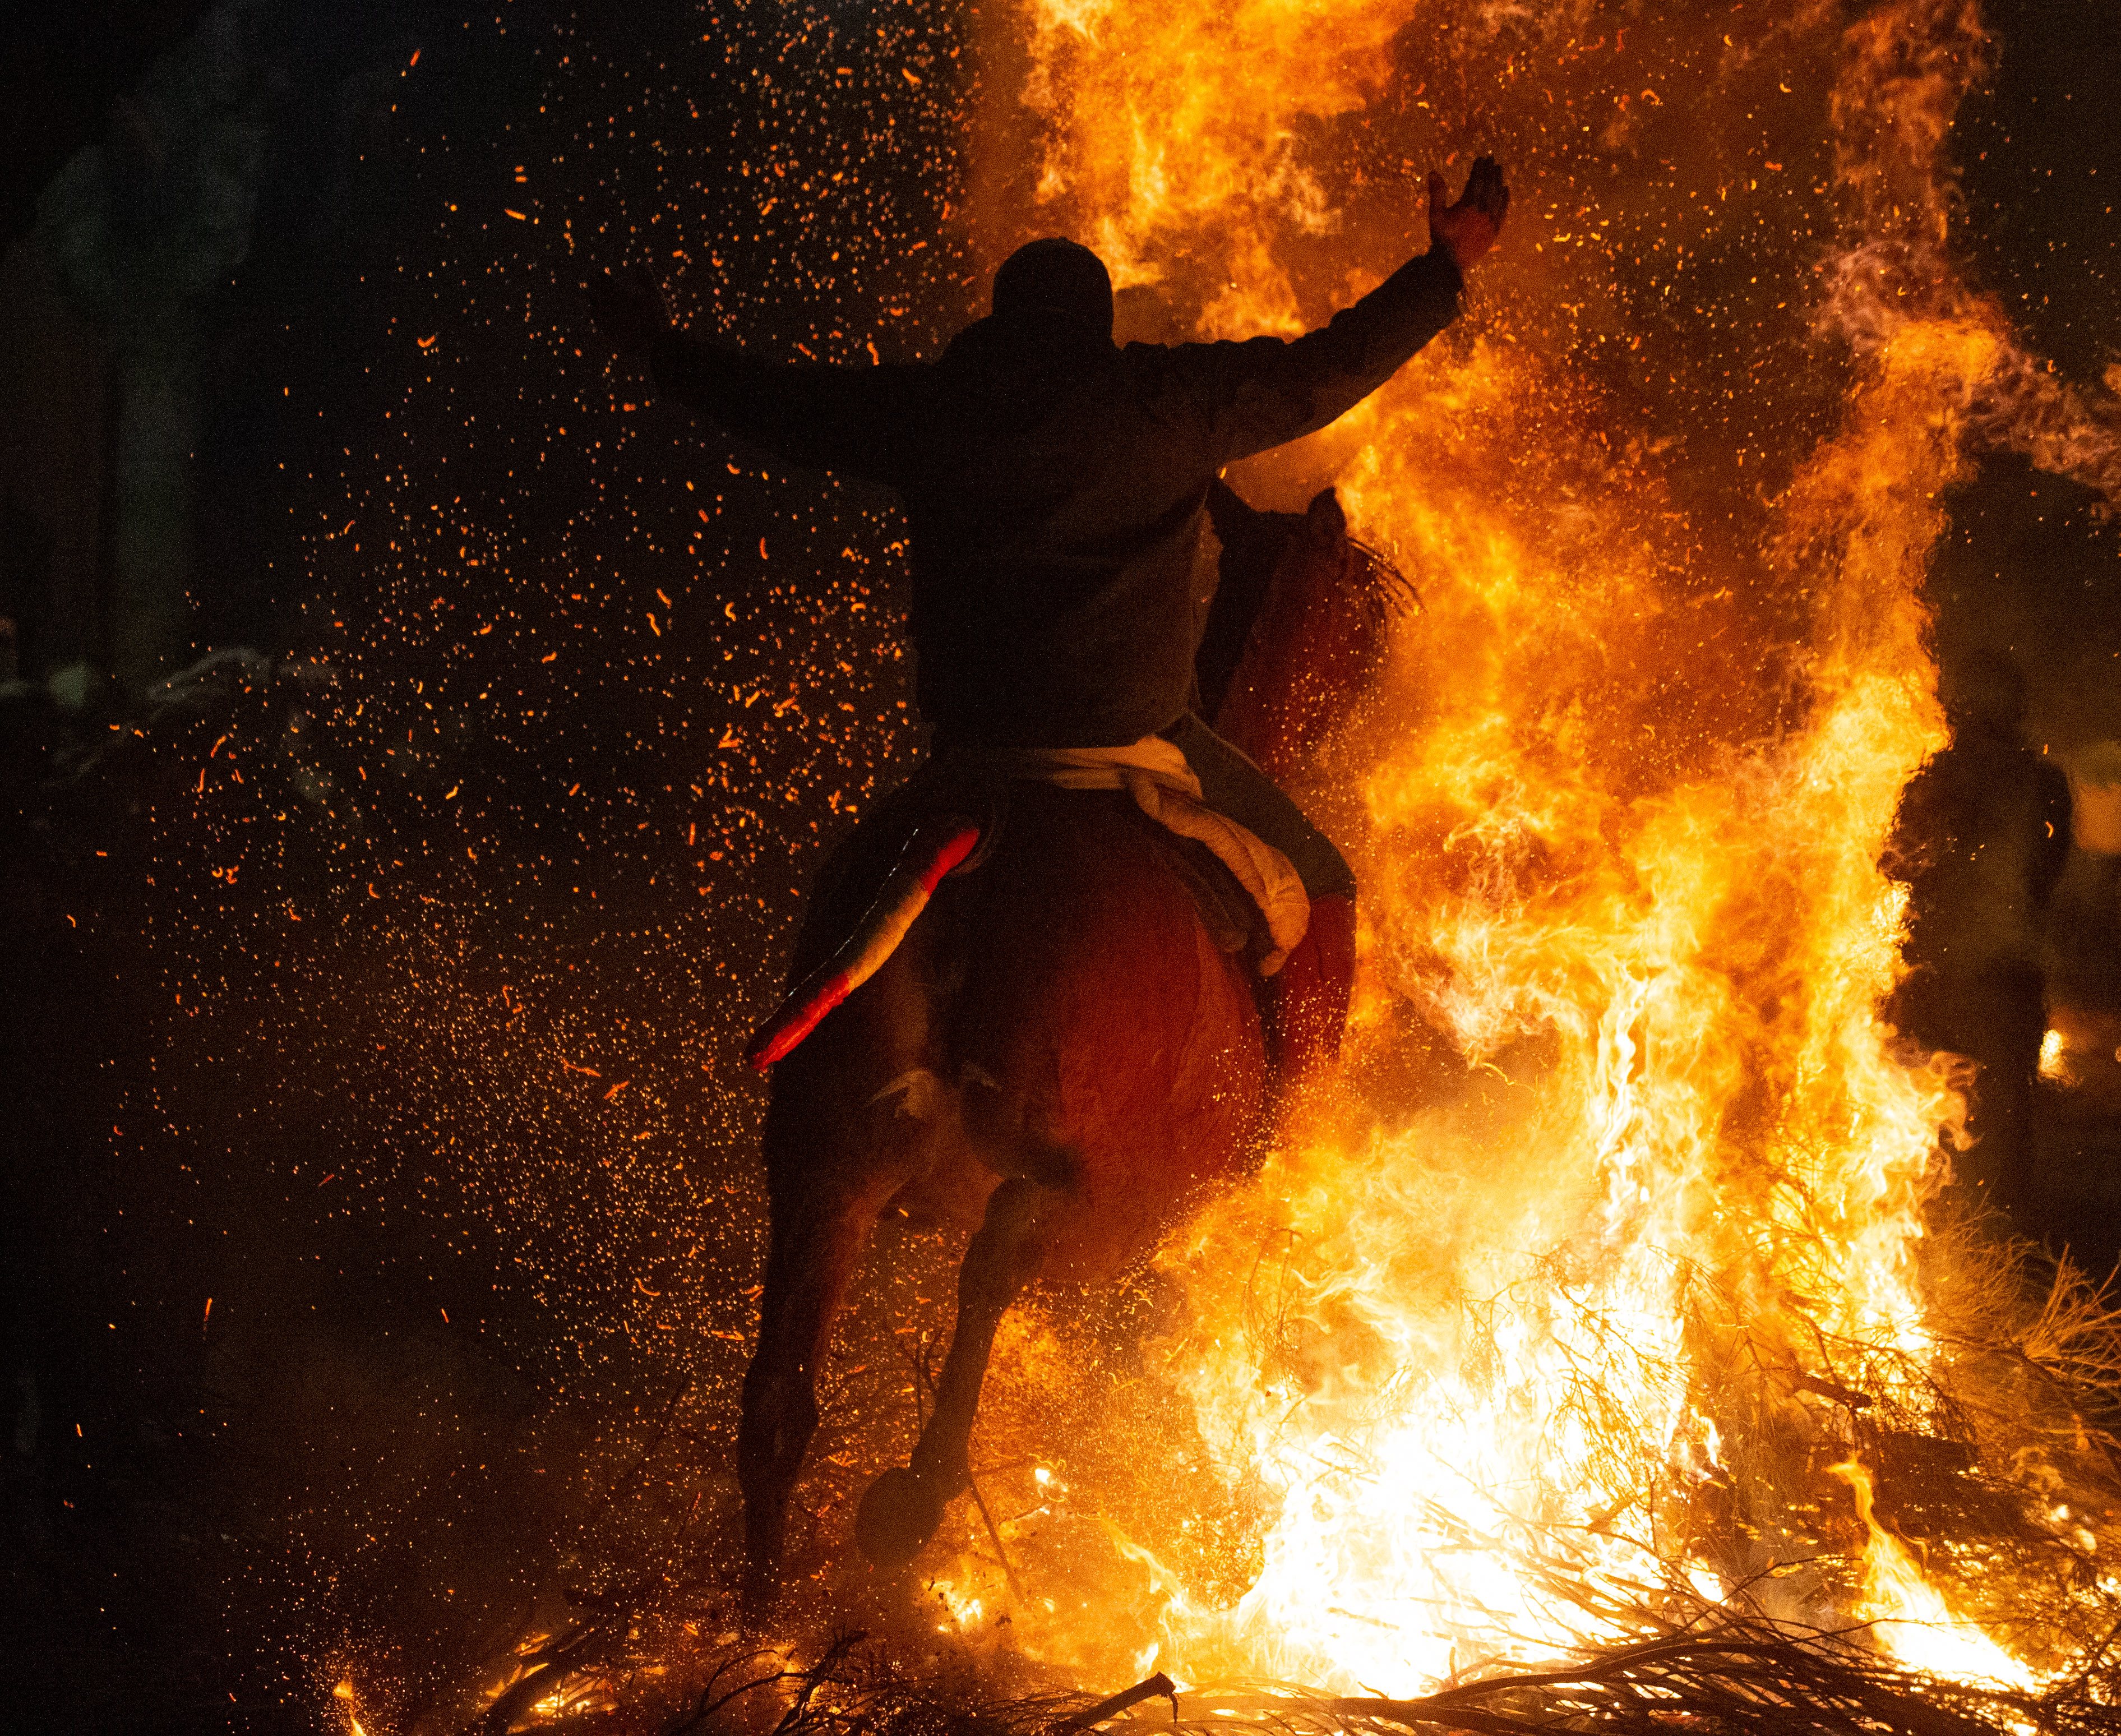 Spain&#039;s Horse And Fire Luminarias Festival 2022 Returns After Pandemic Hiatus